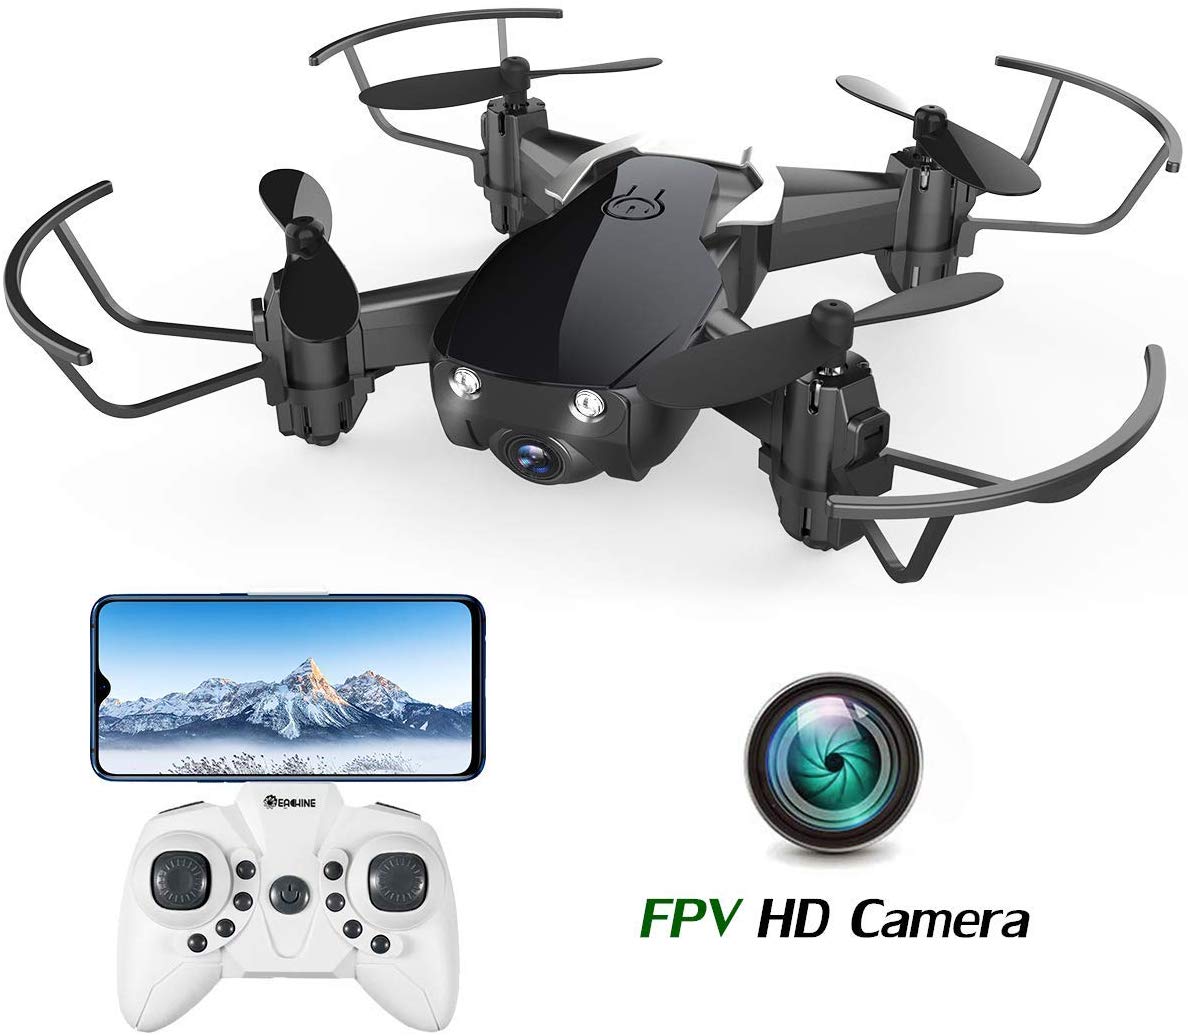 LIGHTNING DEAL!!! Mini Drone with Camera for Kids and Adults $29.98 (REG $55.99)